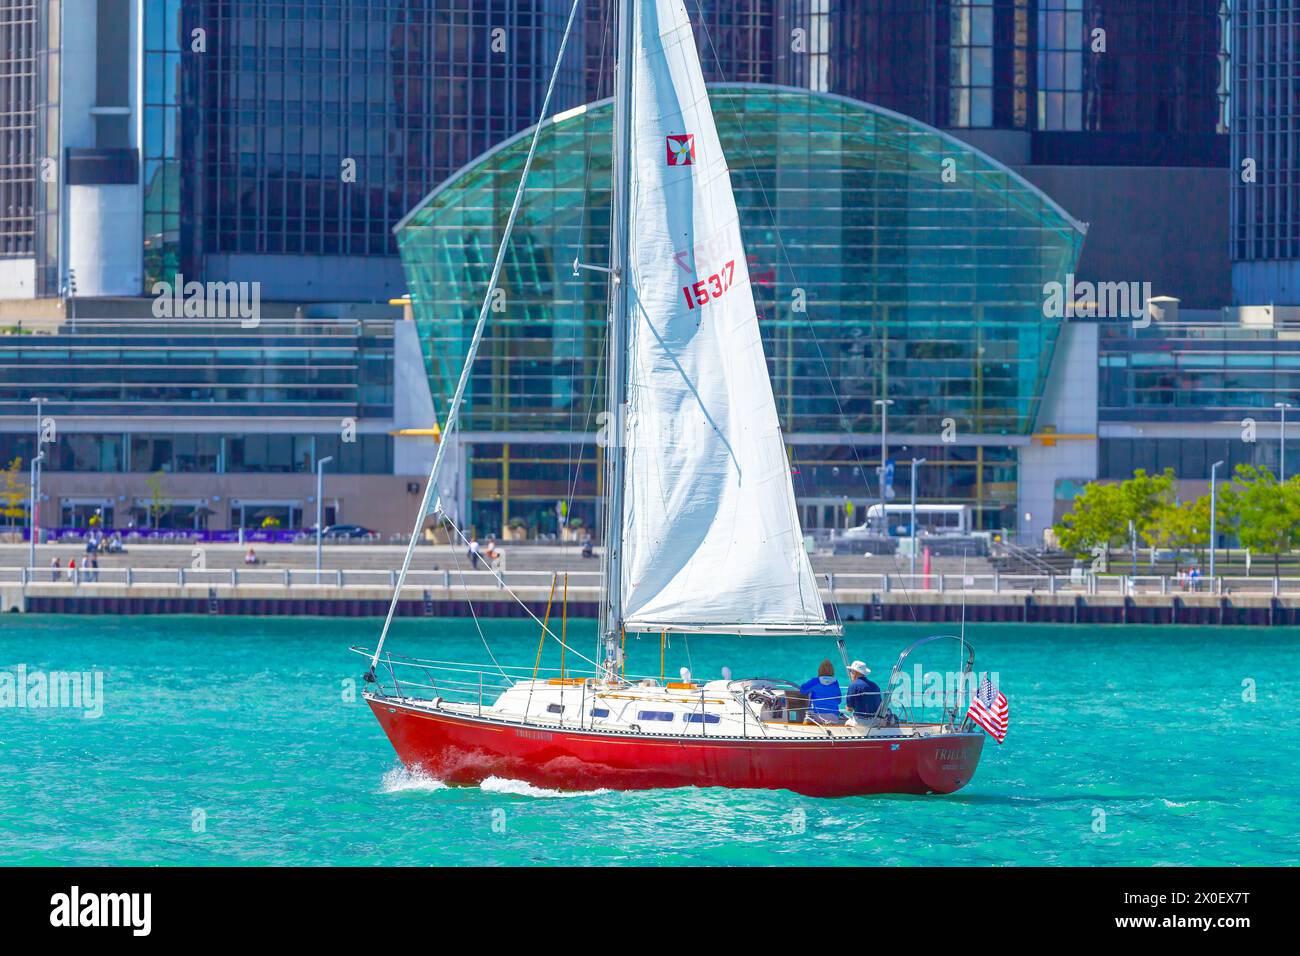 Sailing on the Detroit River at the Detroit International Riverfront and the entrance to the Renaissance Center, featuring GM world headquarters in De Stock Photo